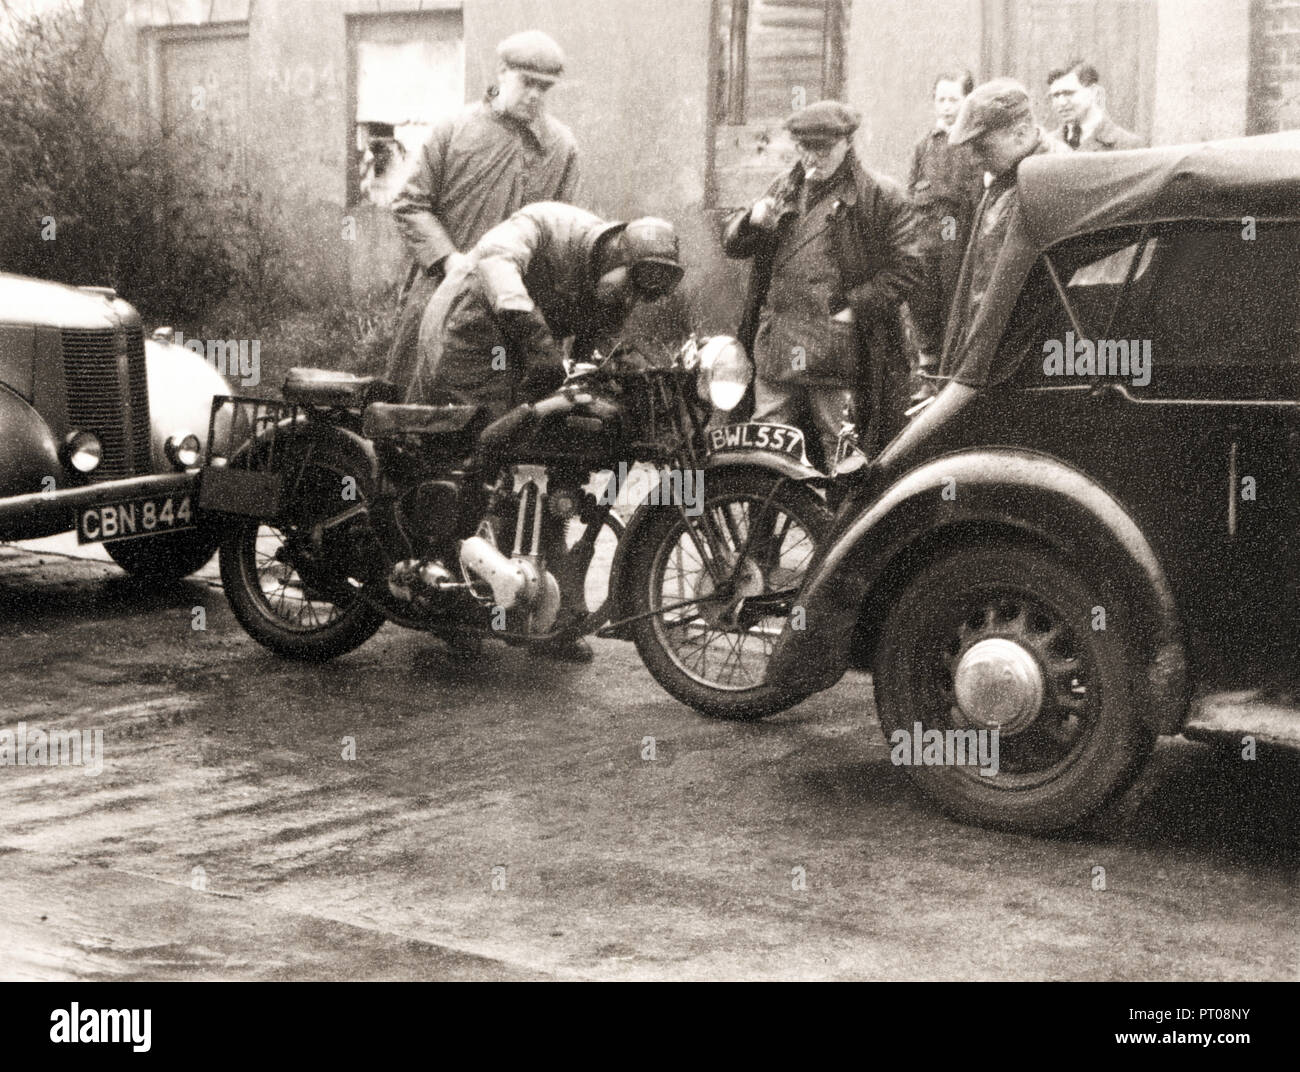 Men in street gathered around a 1934 Ariel Red Hunter motorcycle in the 1930s Stock Photo